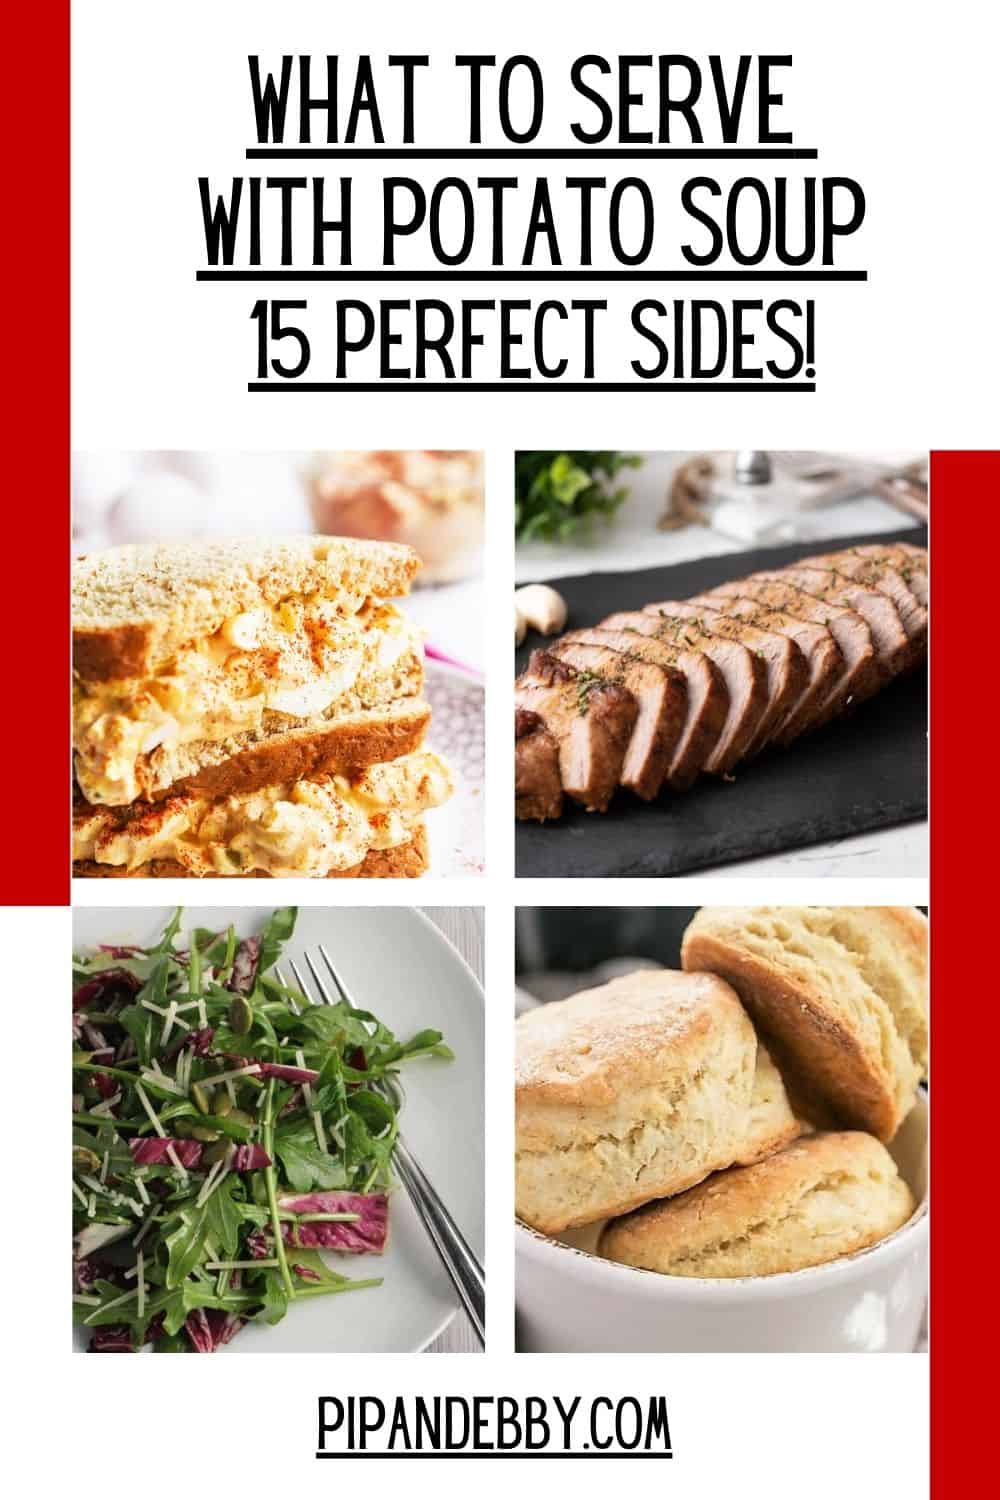 Pinterest graphic with 4 side dishes and text that reads, "What to serve with potato soup: 15 perfect sides!"